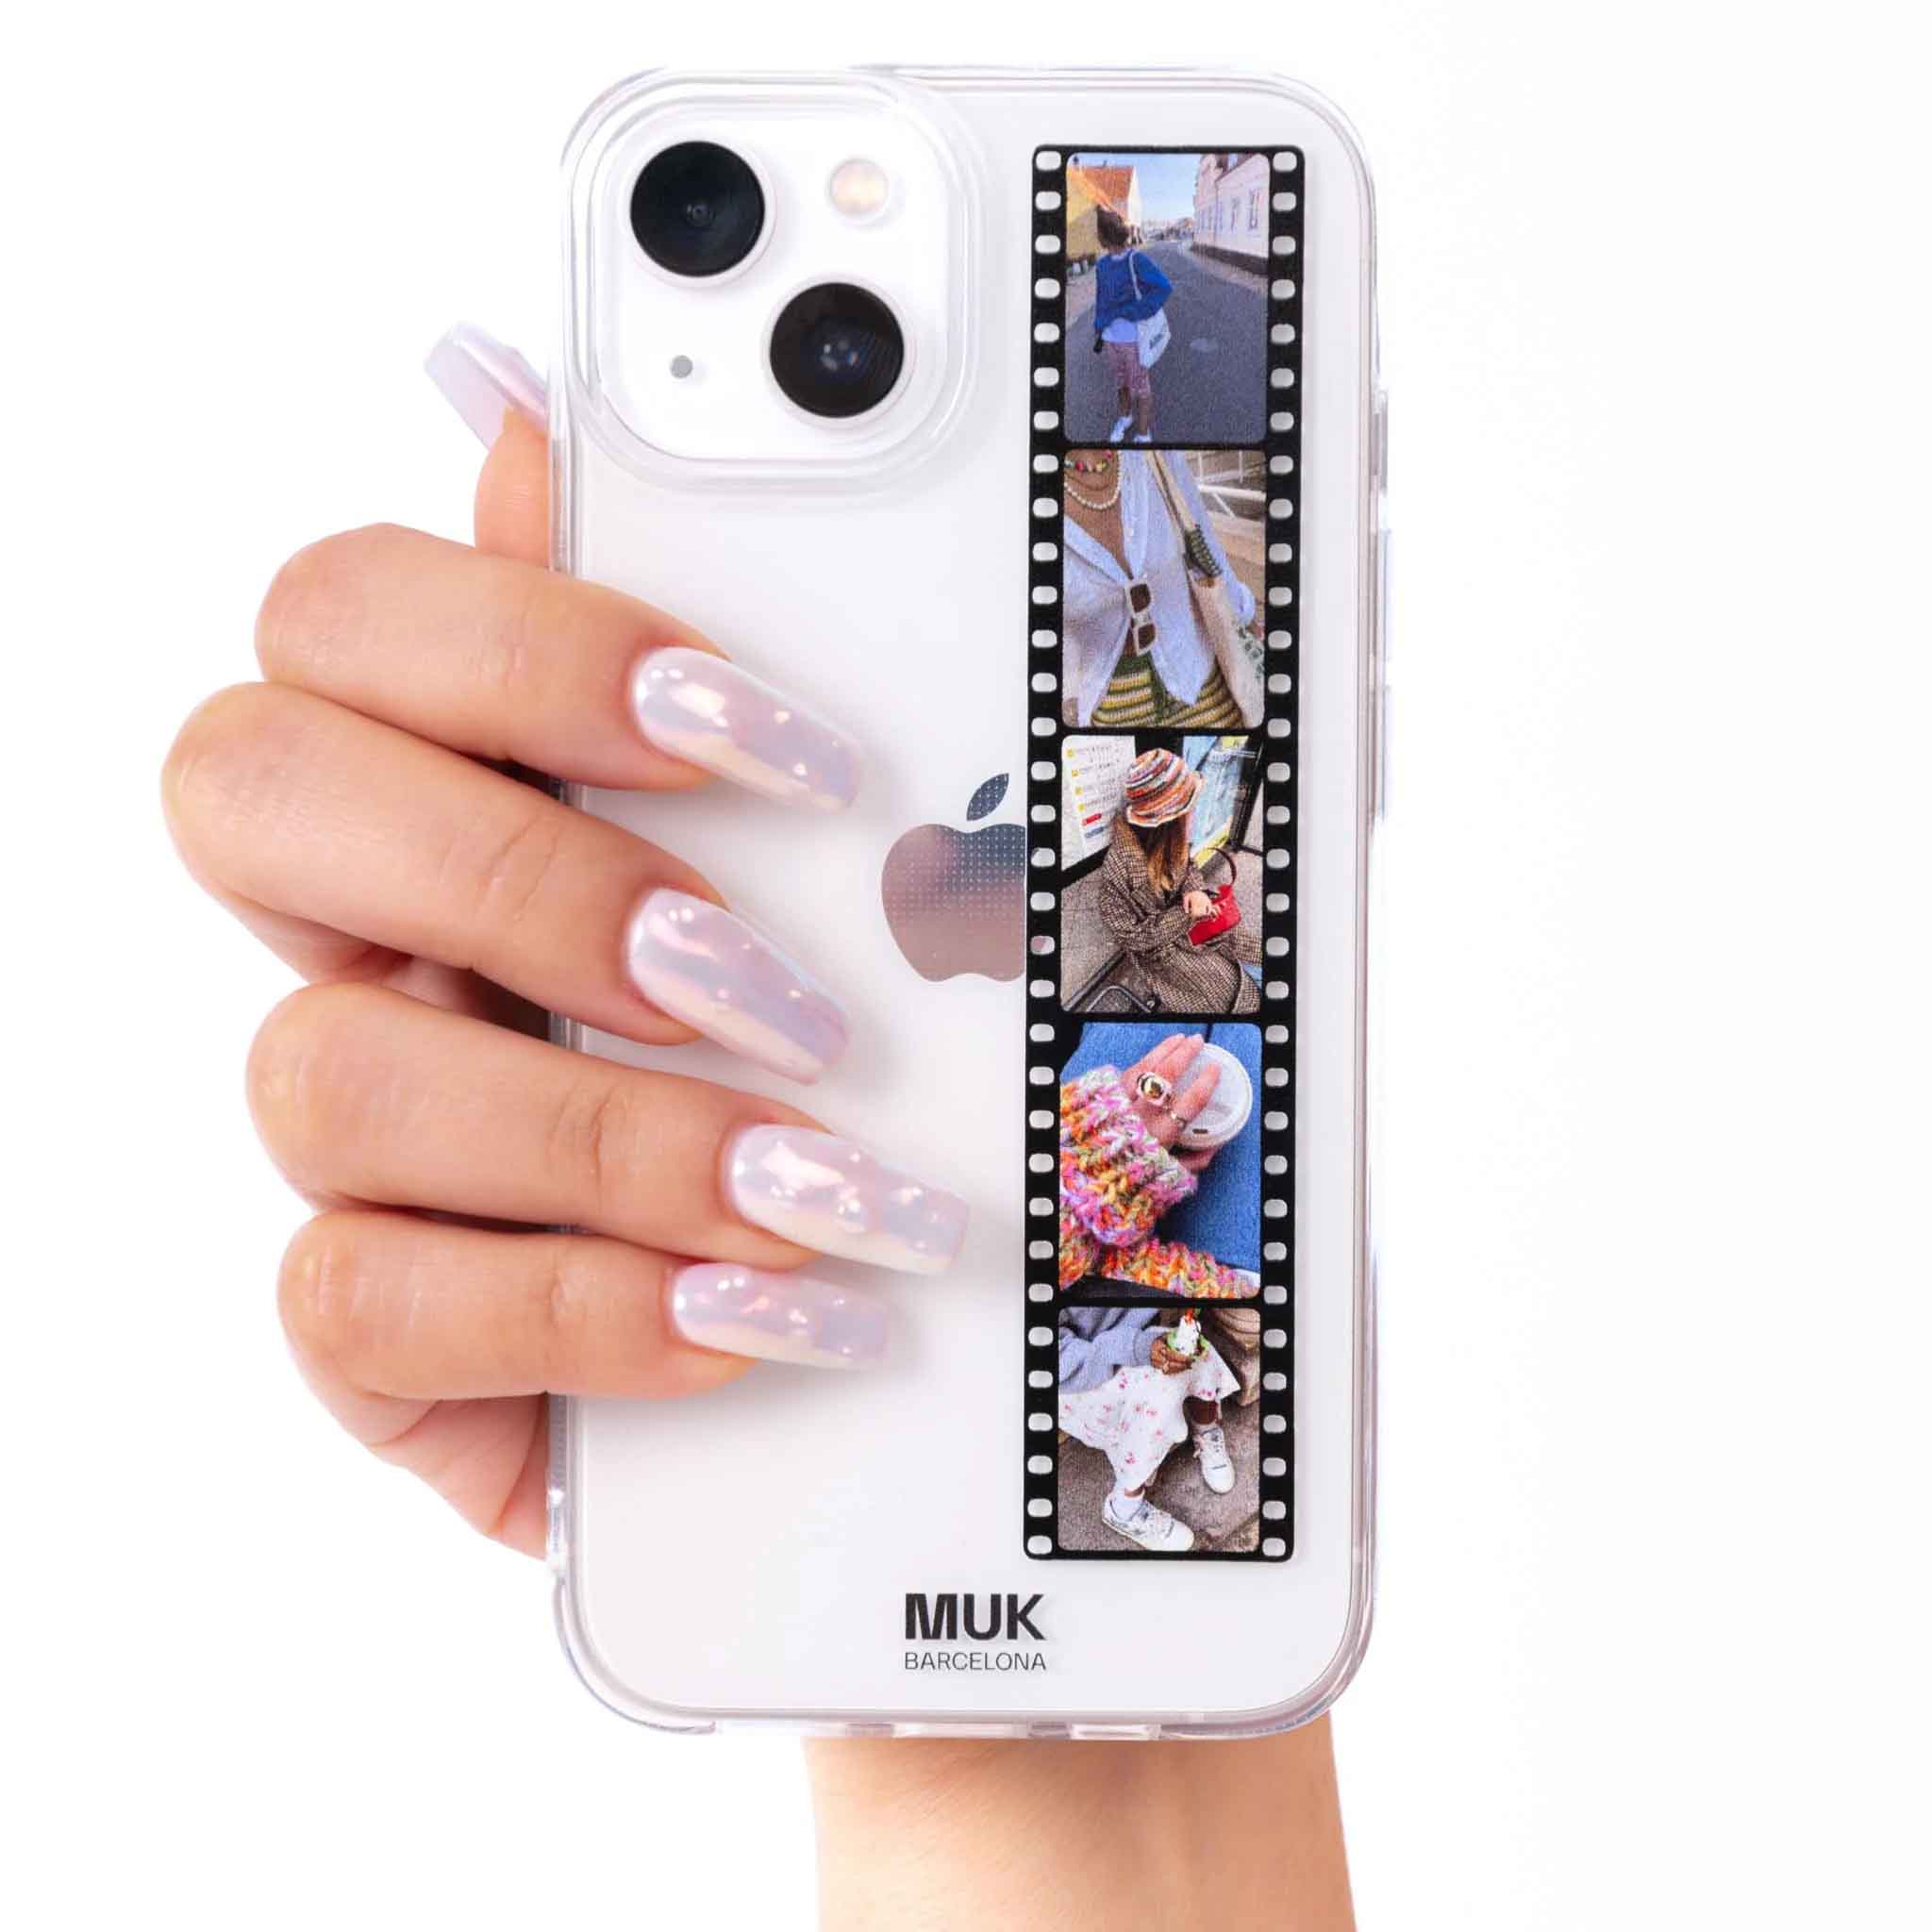 Personalized clear Phone Case reel of 4 vertical photos. Combine your favorite photos instantly

